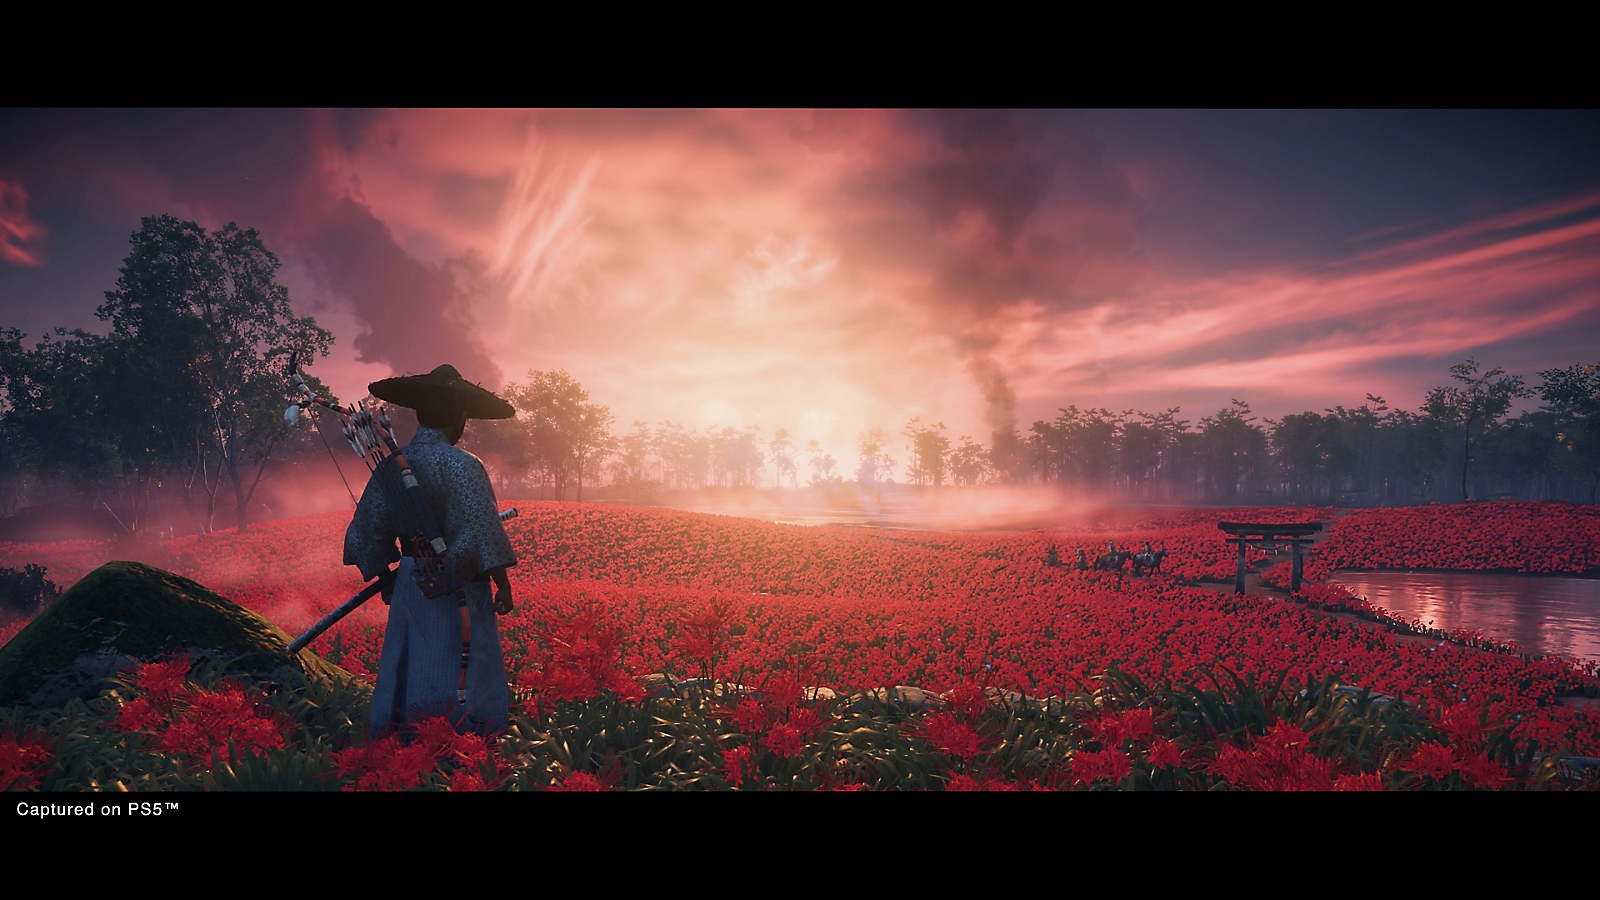 Ghost Of Tsushima Director's Cut PlayStation 4 Account